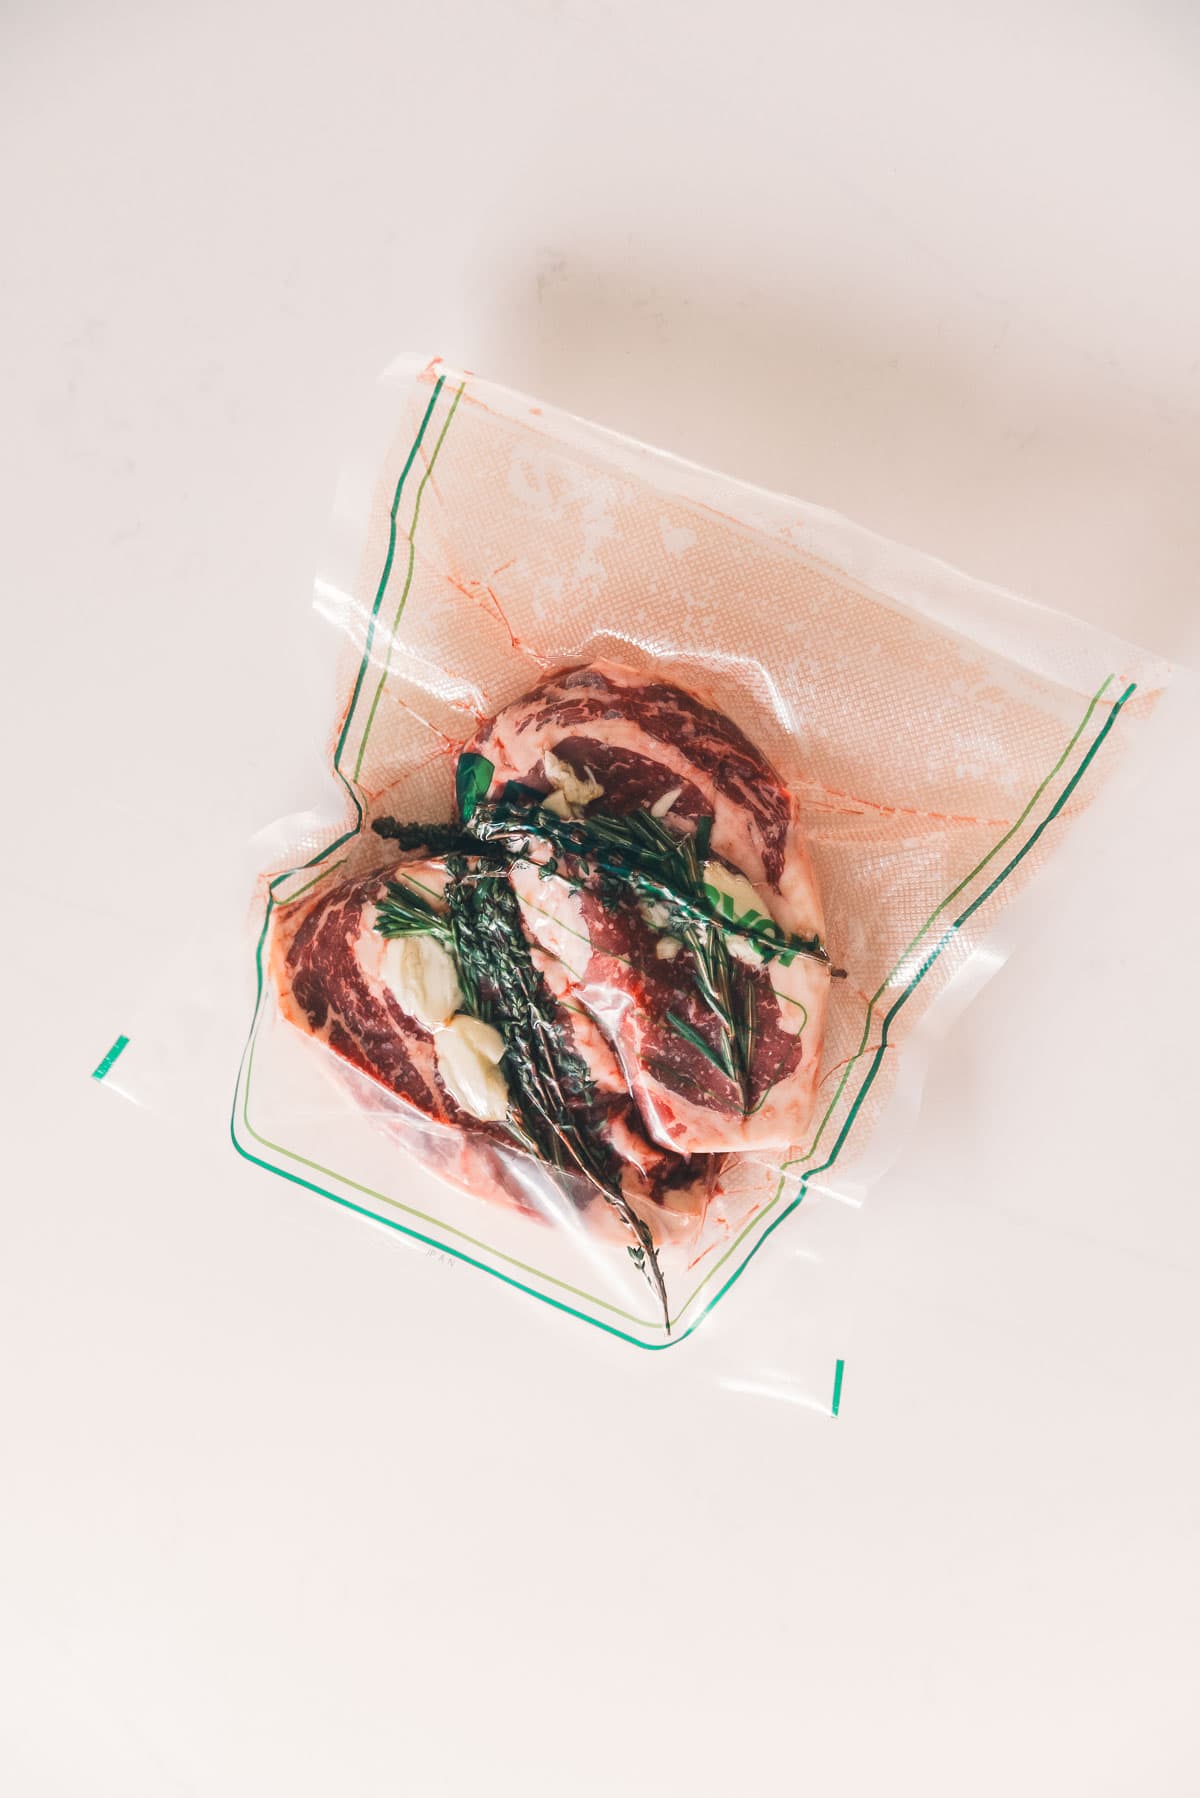 Raw ribeye steaks in a vacuum-sealed bag with herbs and garlic, ready for sous vide cooking, viewed from above on a light background.